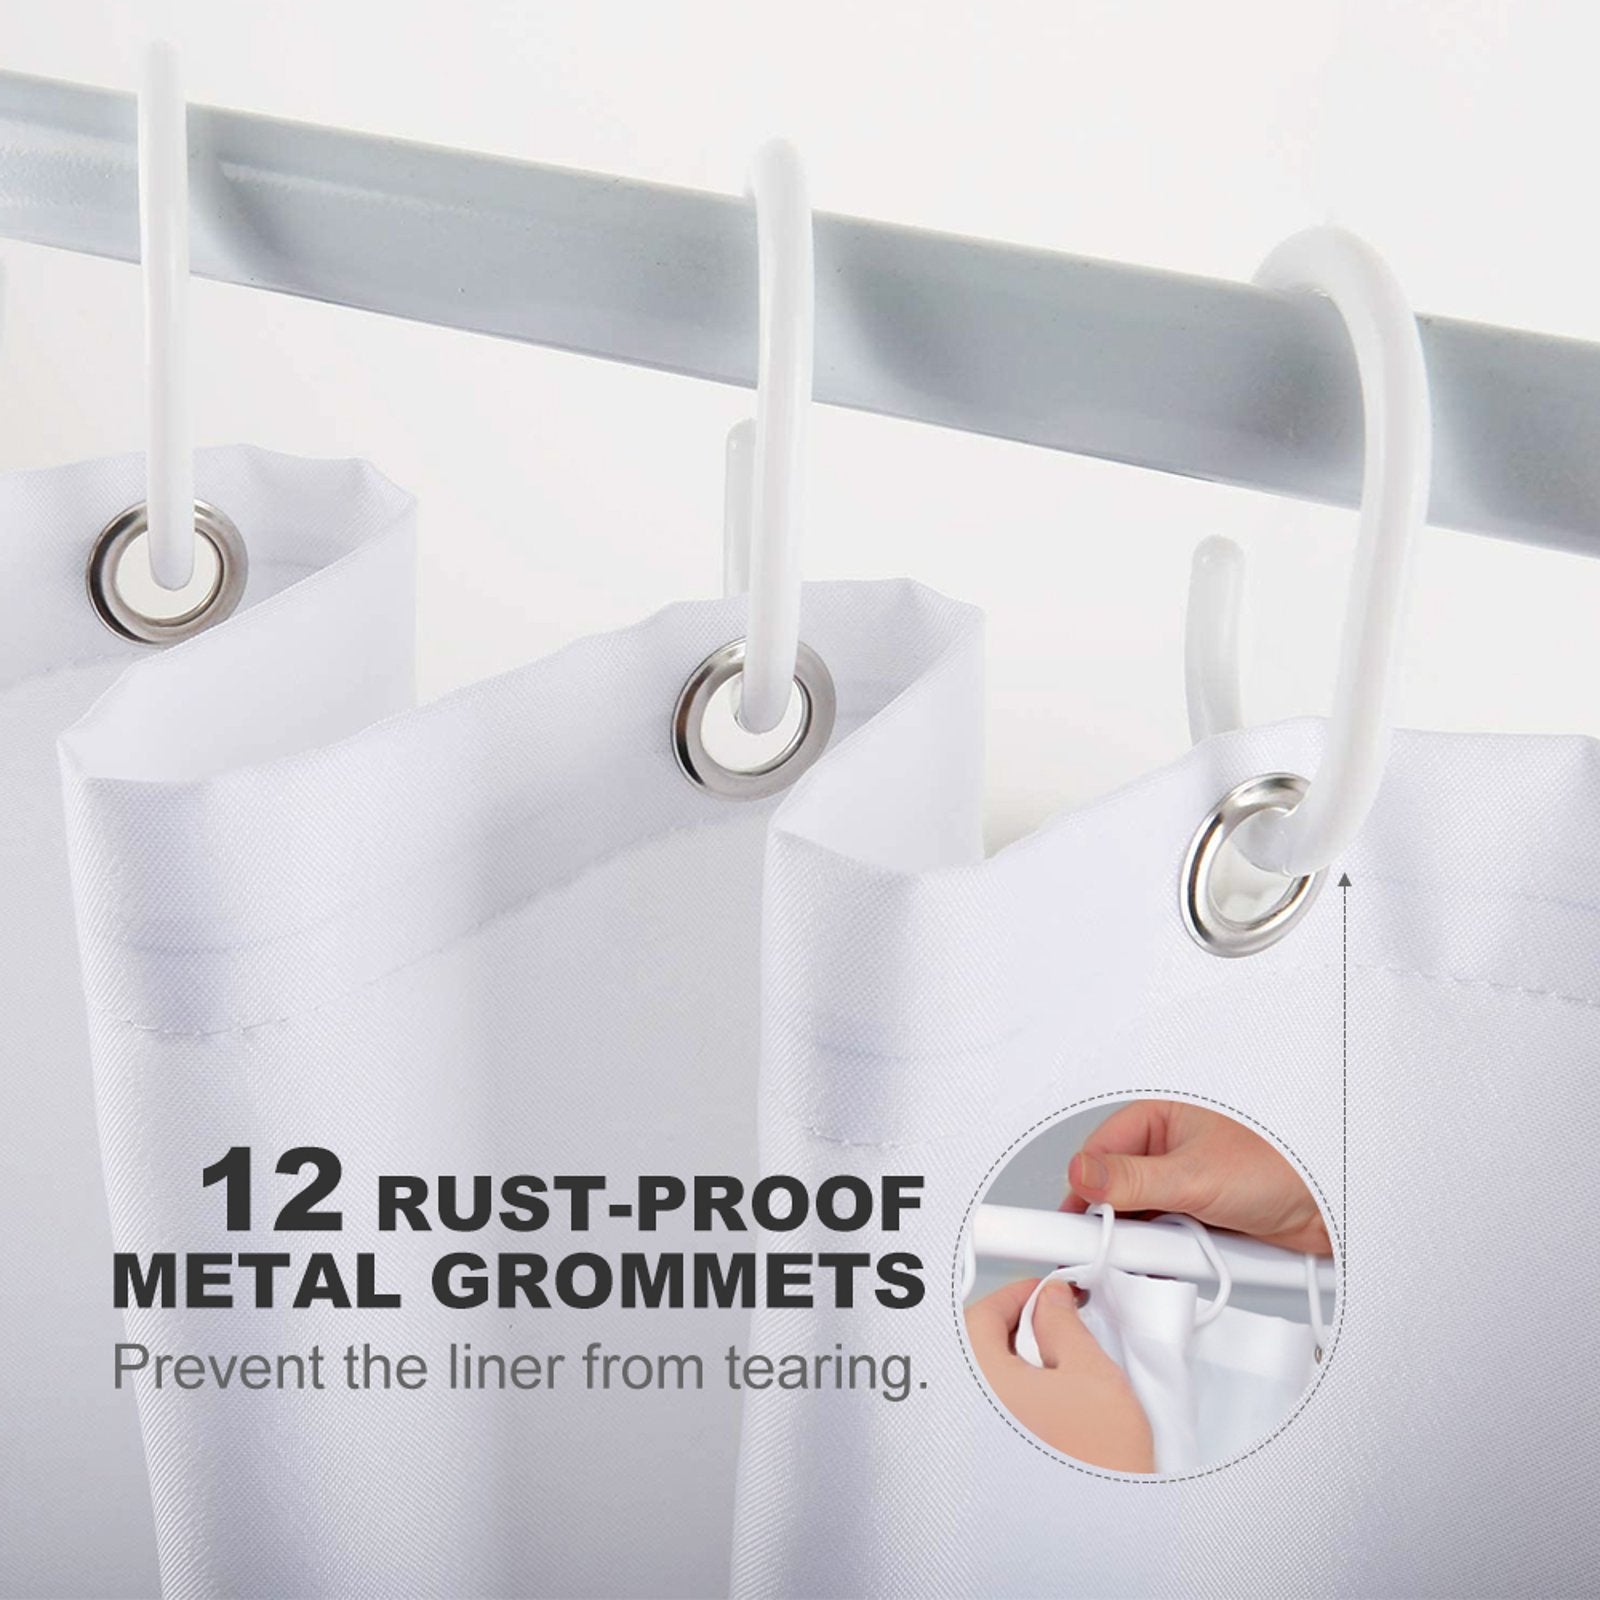 Close-up of a white shower curtain hanging from hooks on a rod, featuring 12 rust-proof metal grommets. A smaller inset image shows hands attaching the curtain to the grommets. Made from 100% polyester and waterproof to prevent the liner from tearing. Text: "Colorful India Style Elephant Shower Curtain-Cottoncat.
